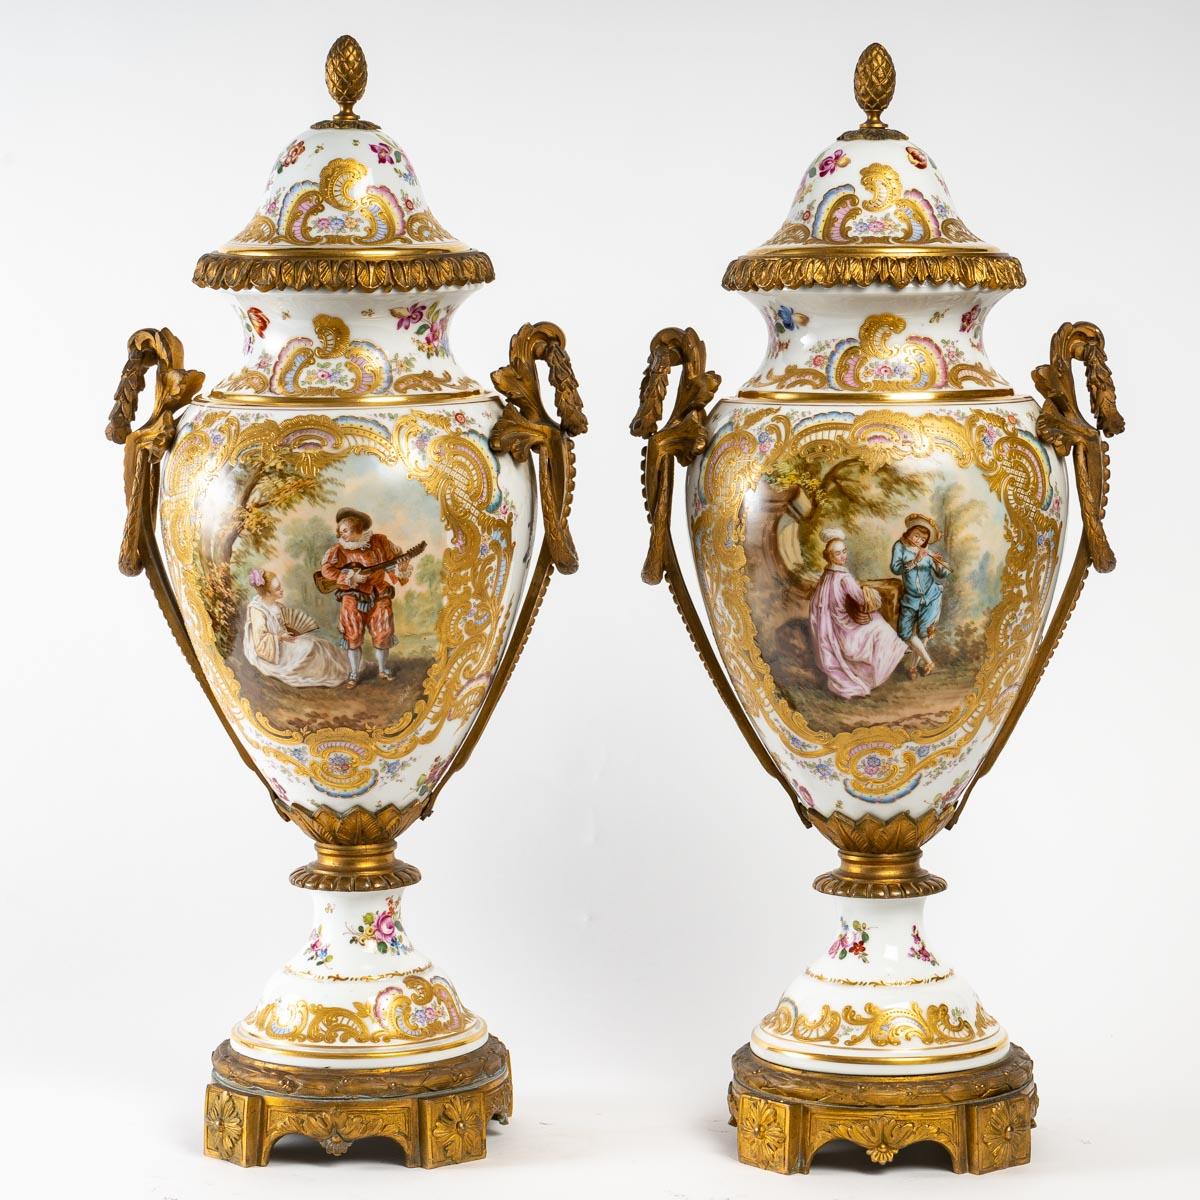 Pair of Sèvres porcelain covered vases, white background and rich decoration, very nice chasing of the bronze with its original gilding, 19th century, Napoleon III period, very good condition, great decoration.
H: 56 cm, W: 27 cm, D: 20 cm
ref 3009